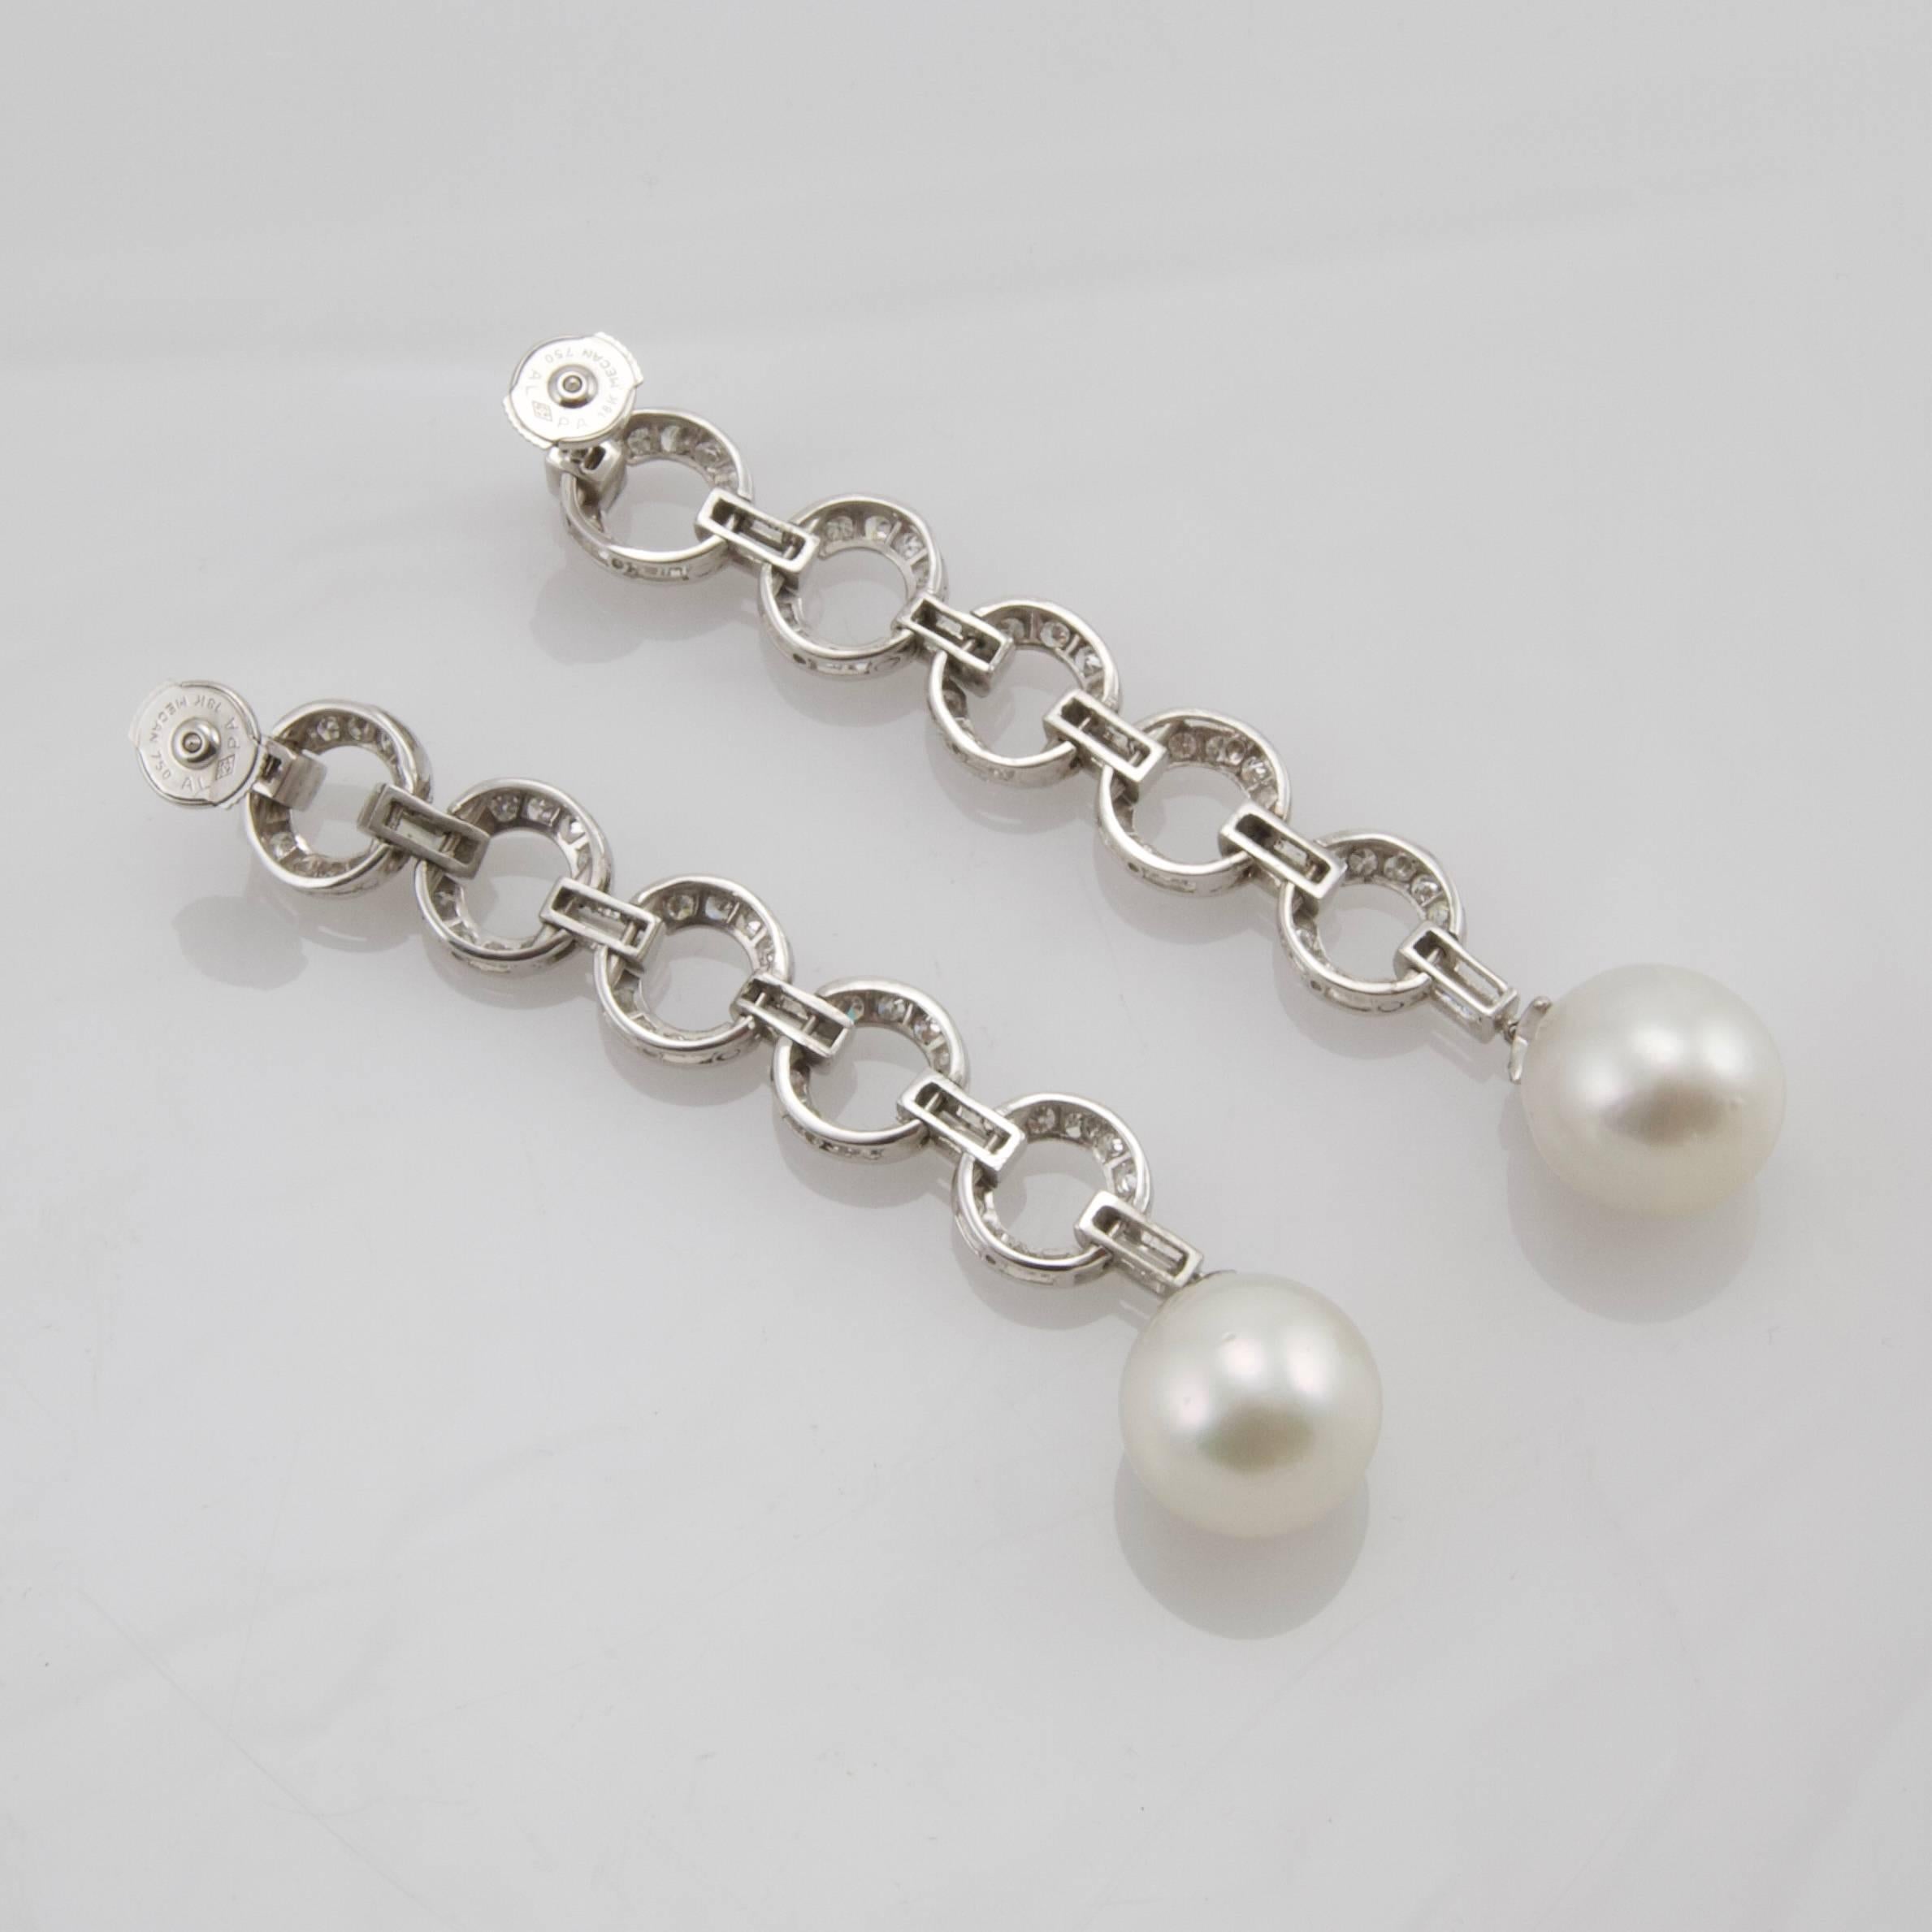 Art Deco Diamond and Cultured-Pearl Earrings from Paris, 1925 For Sale 1